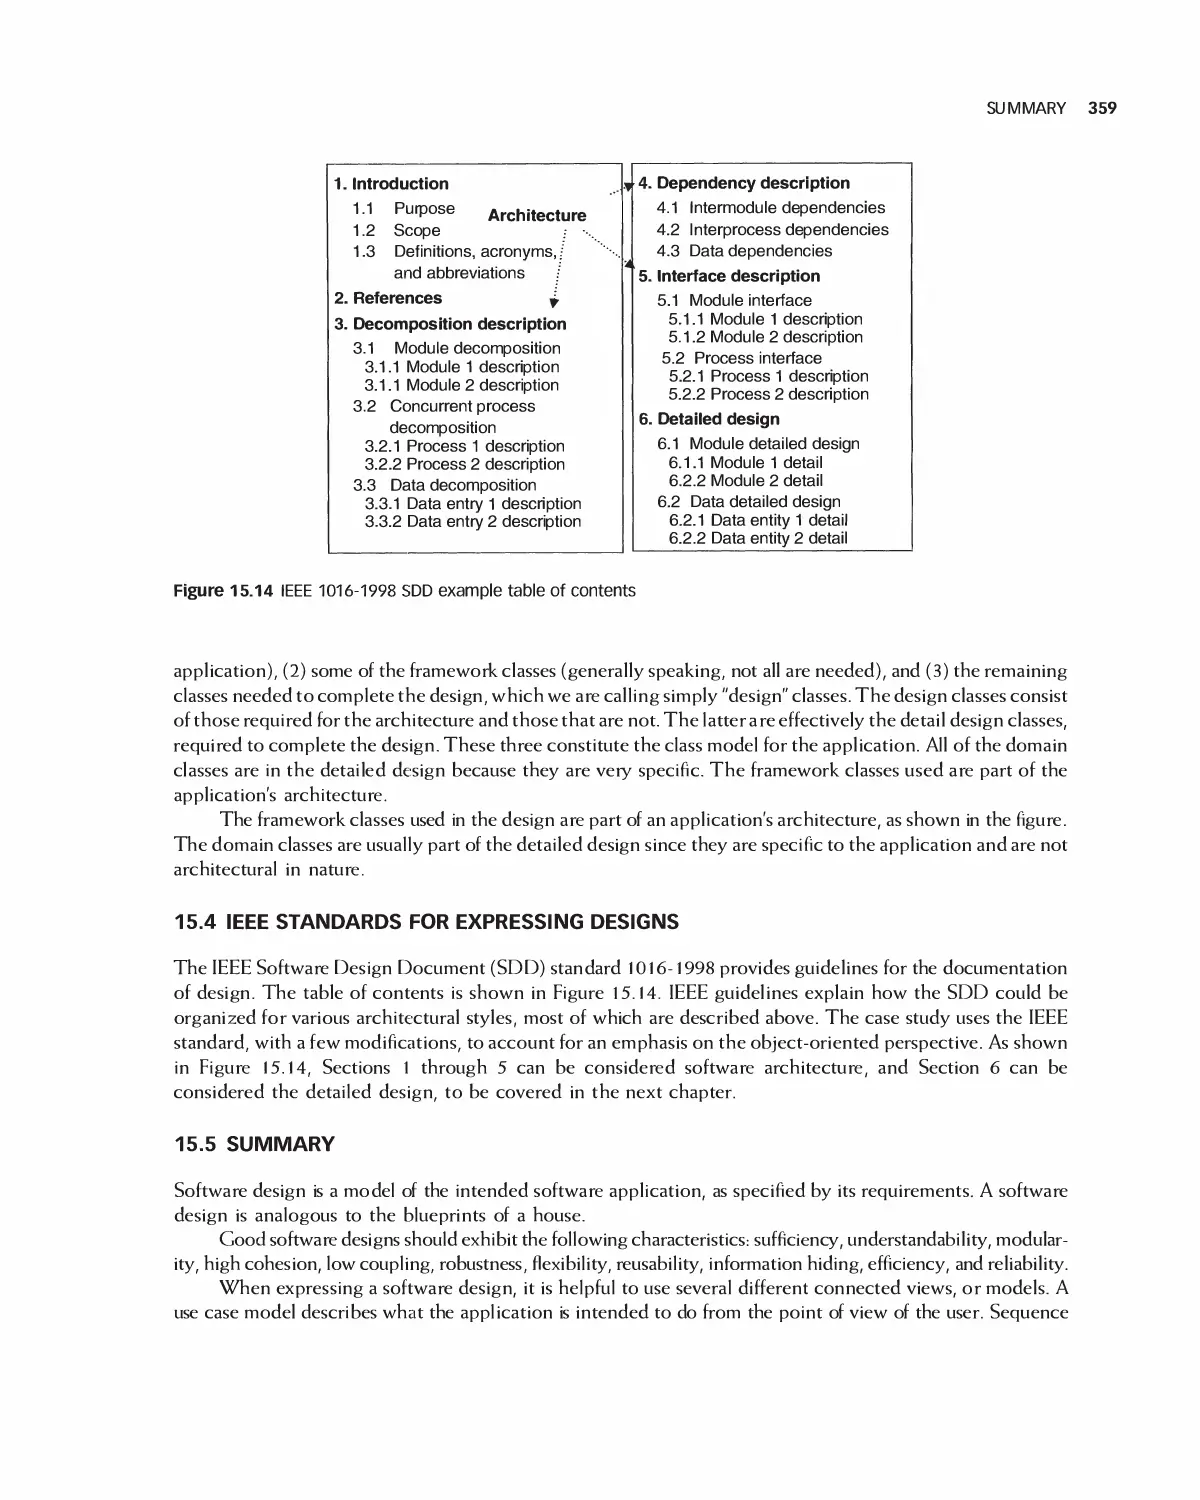 15.4 IEEE Standards for Expressing Designs
15.5 Summary